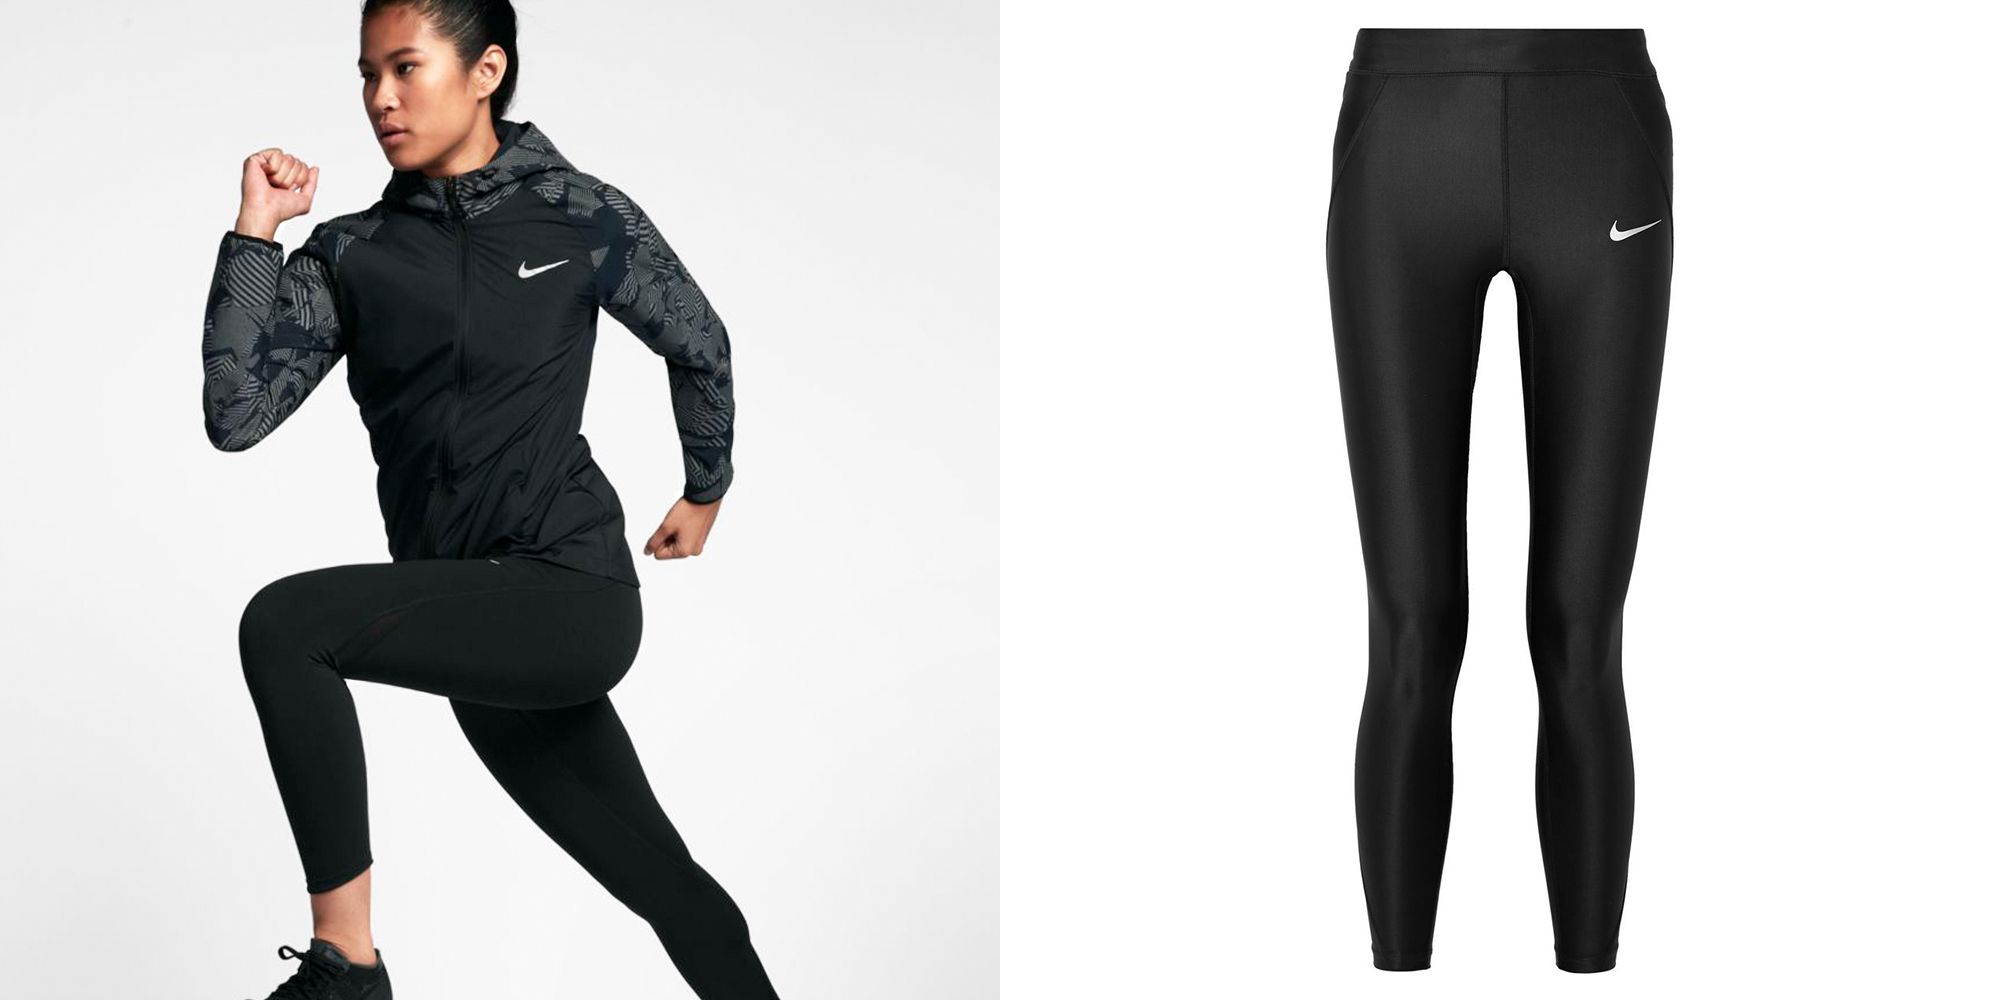 Nike Leggings Are 40% off Just in for Your Resolutions